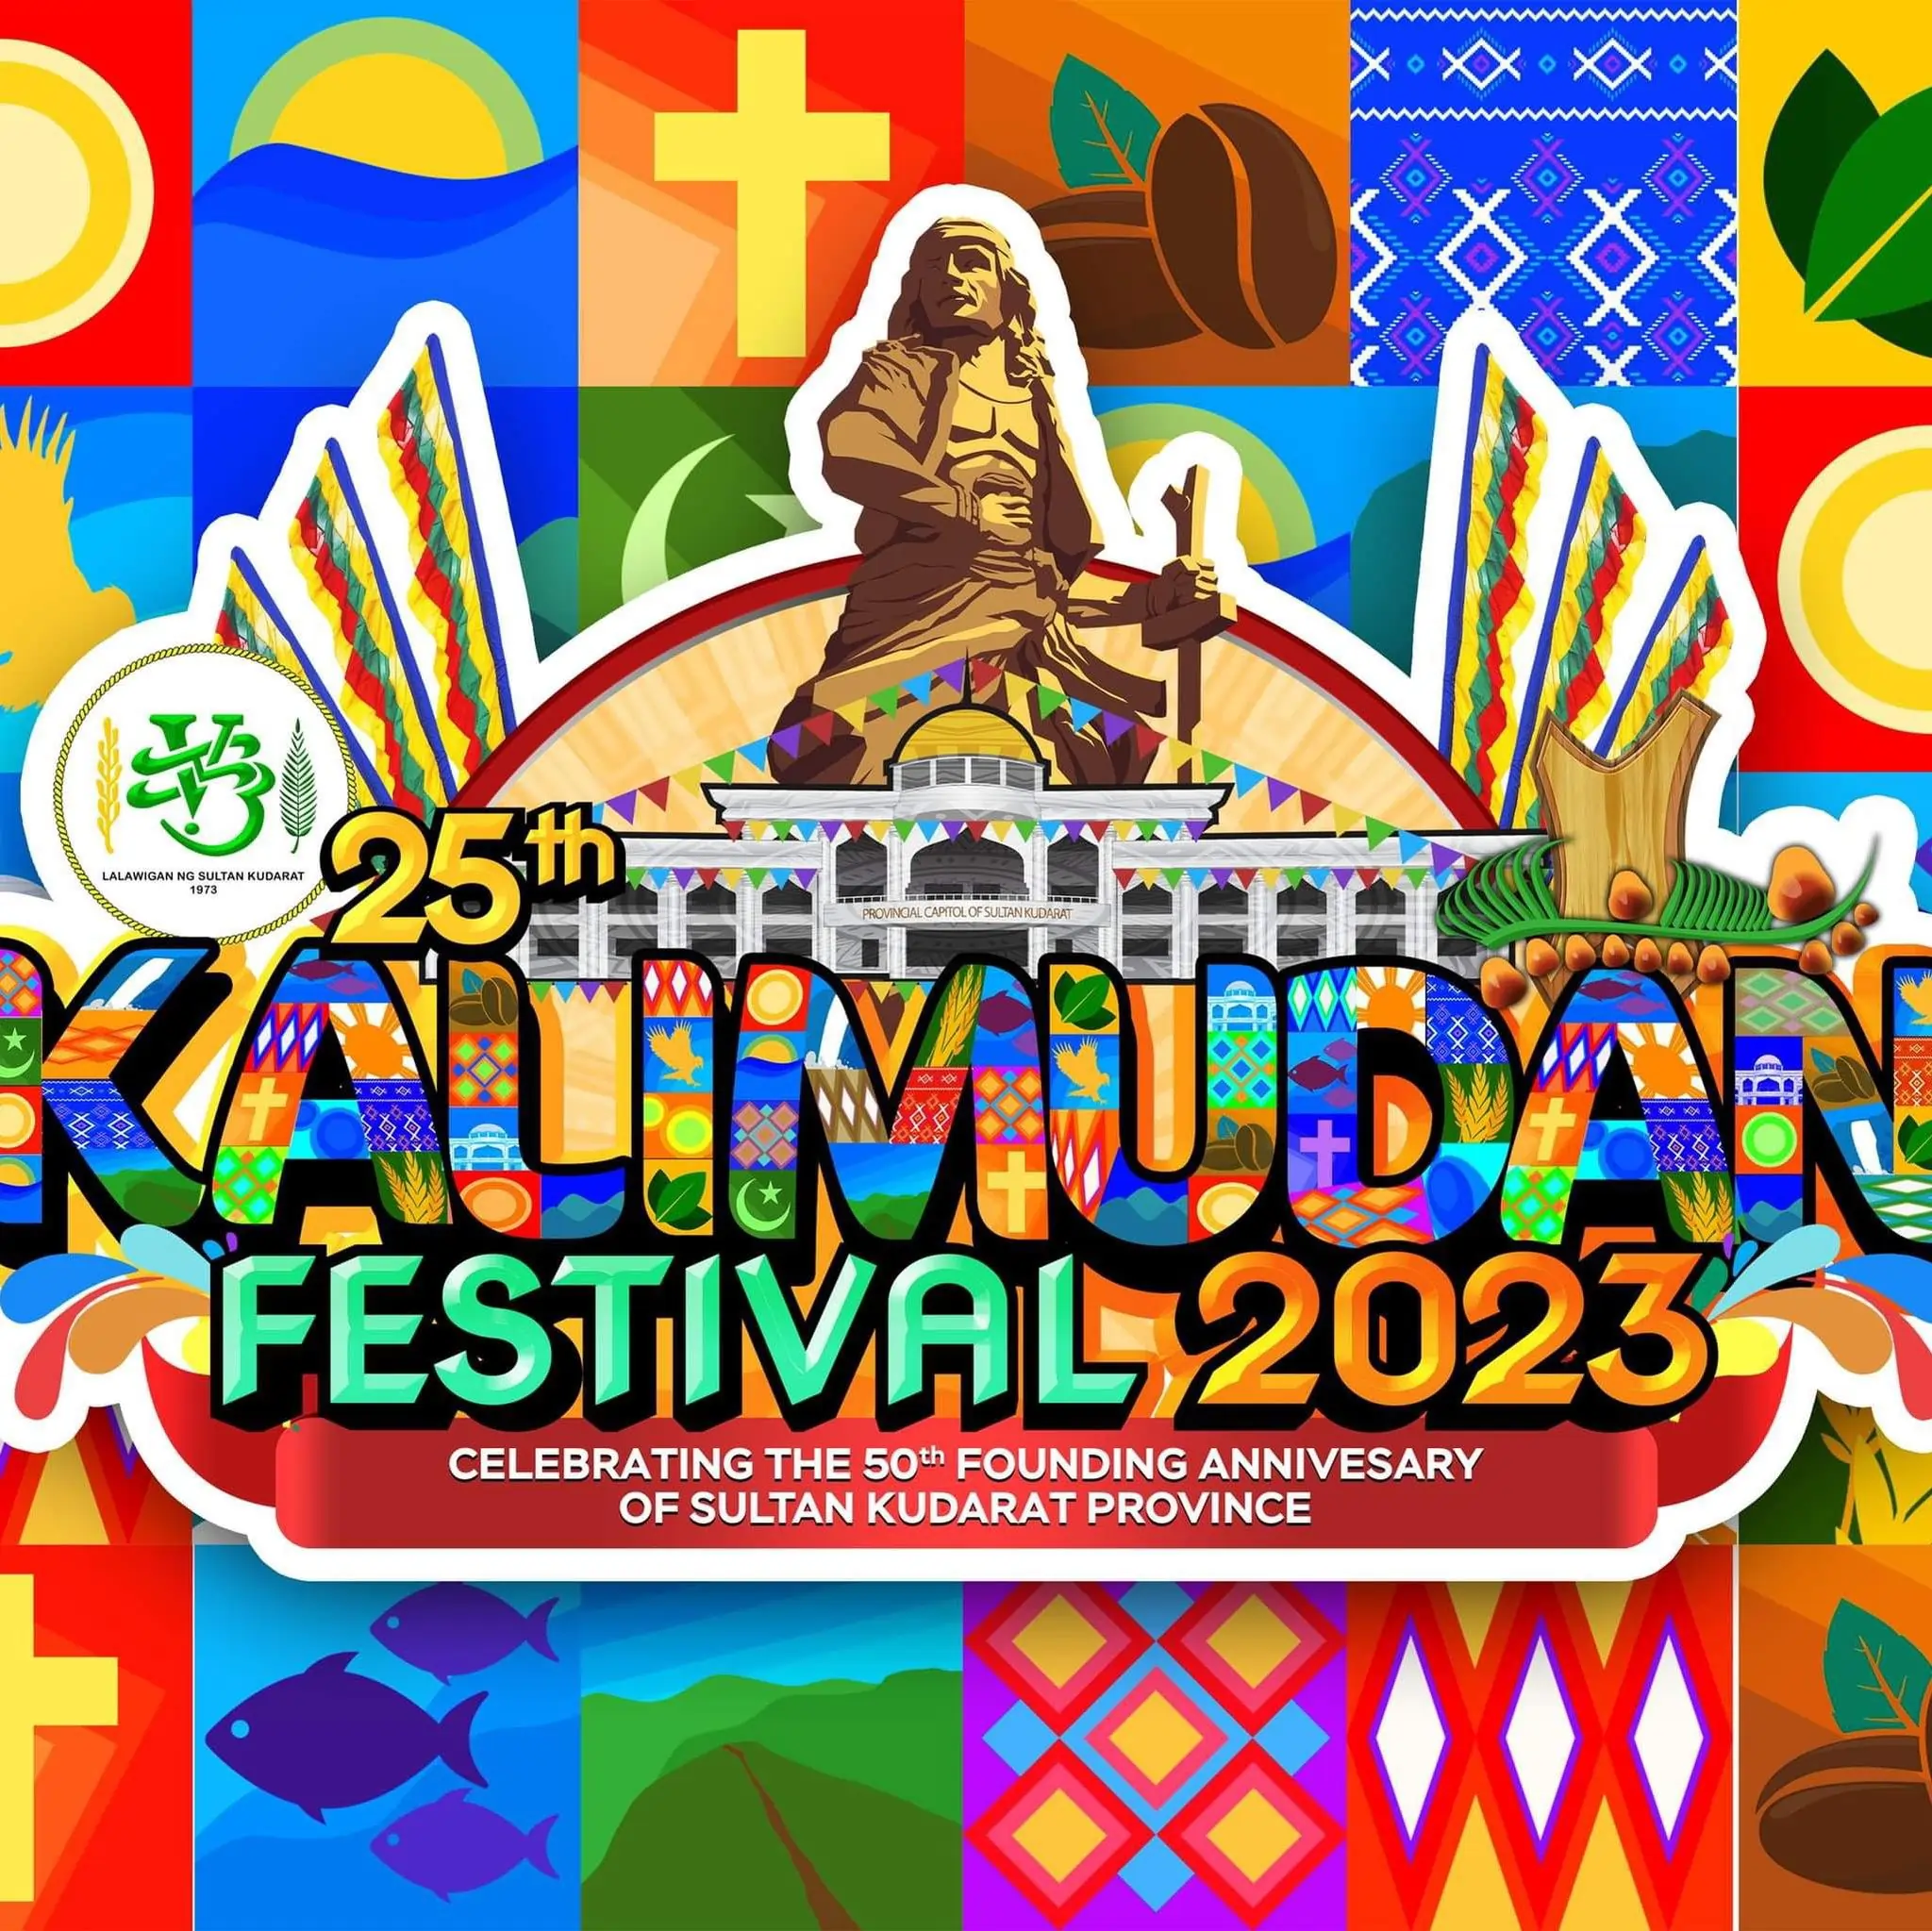 Read more about the article The Grand Kalimudan Festival 2023 | Sultan Kudarat